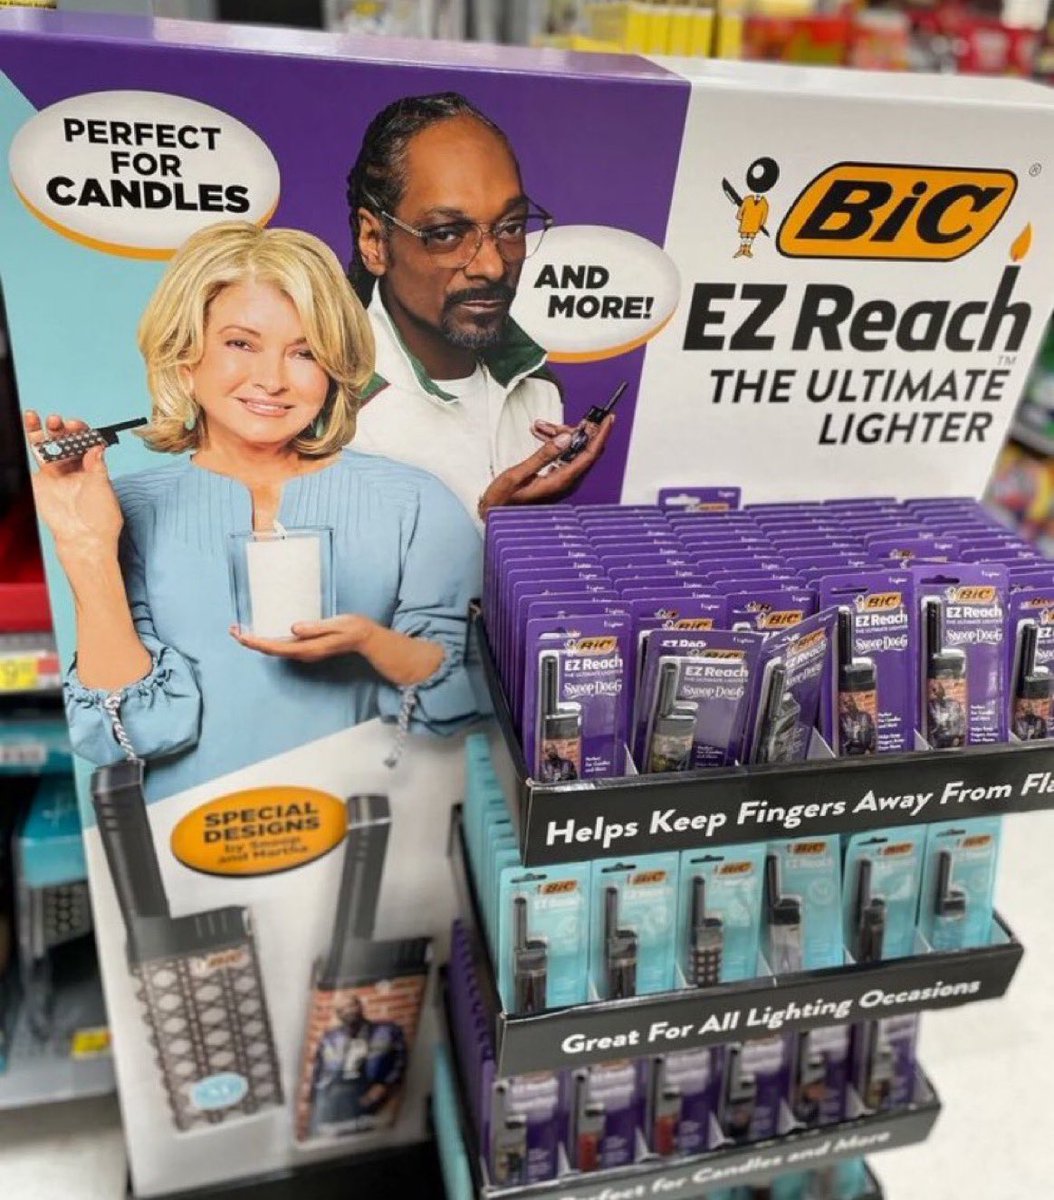 BiC marketing team smart as fuck for this